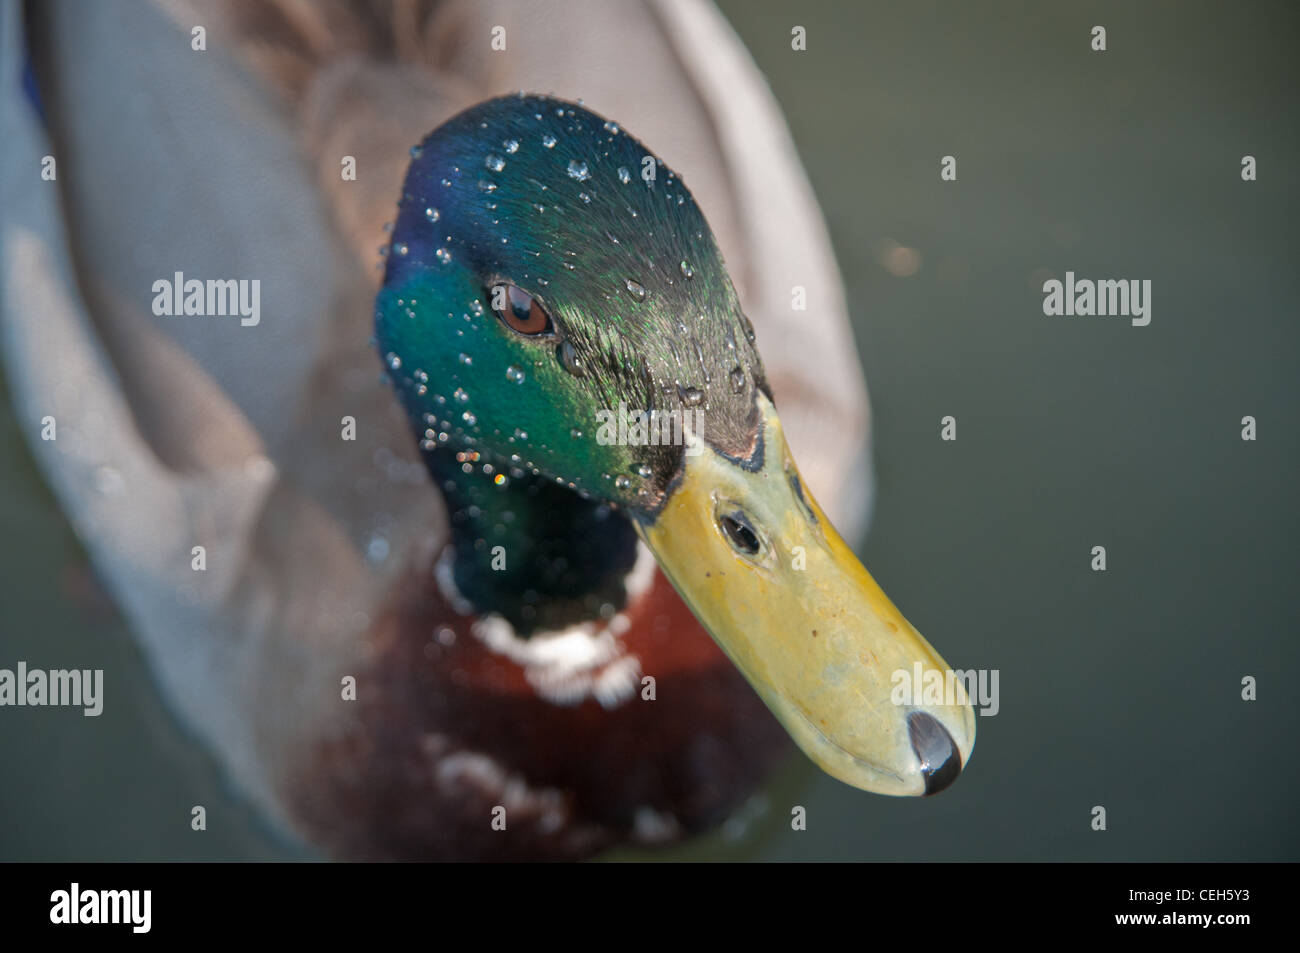 Water on a duck's head Stock Photo